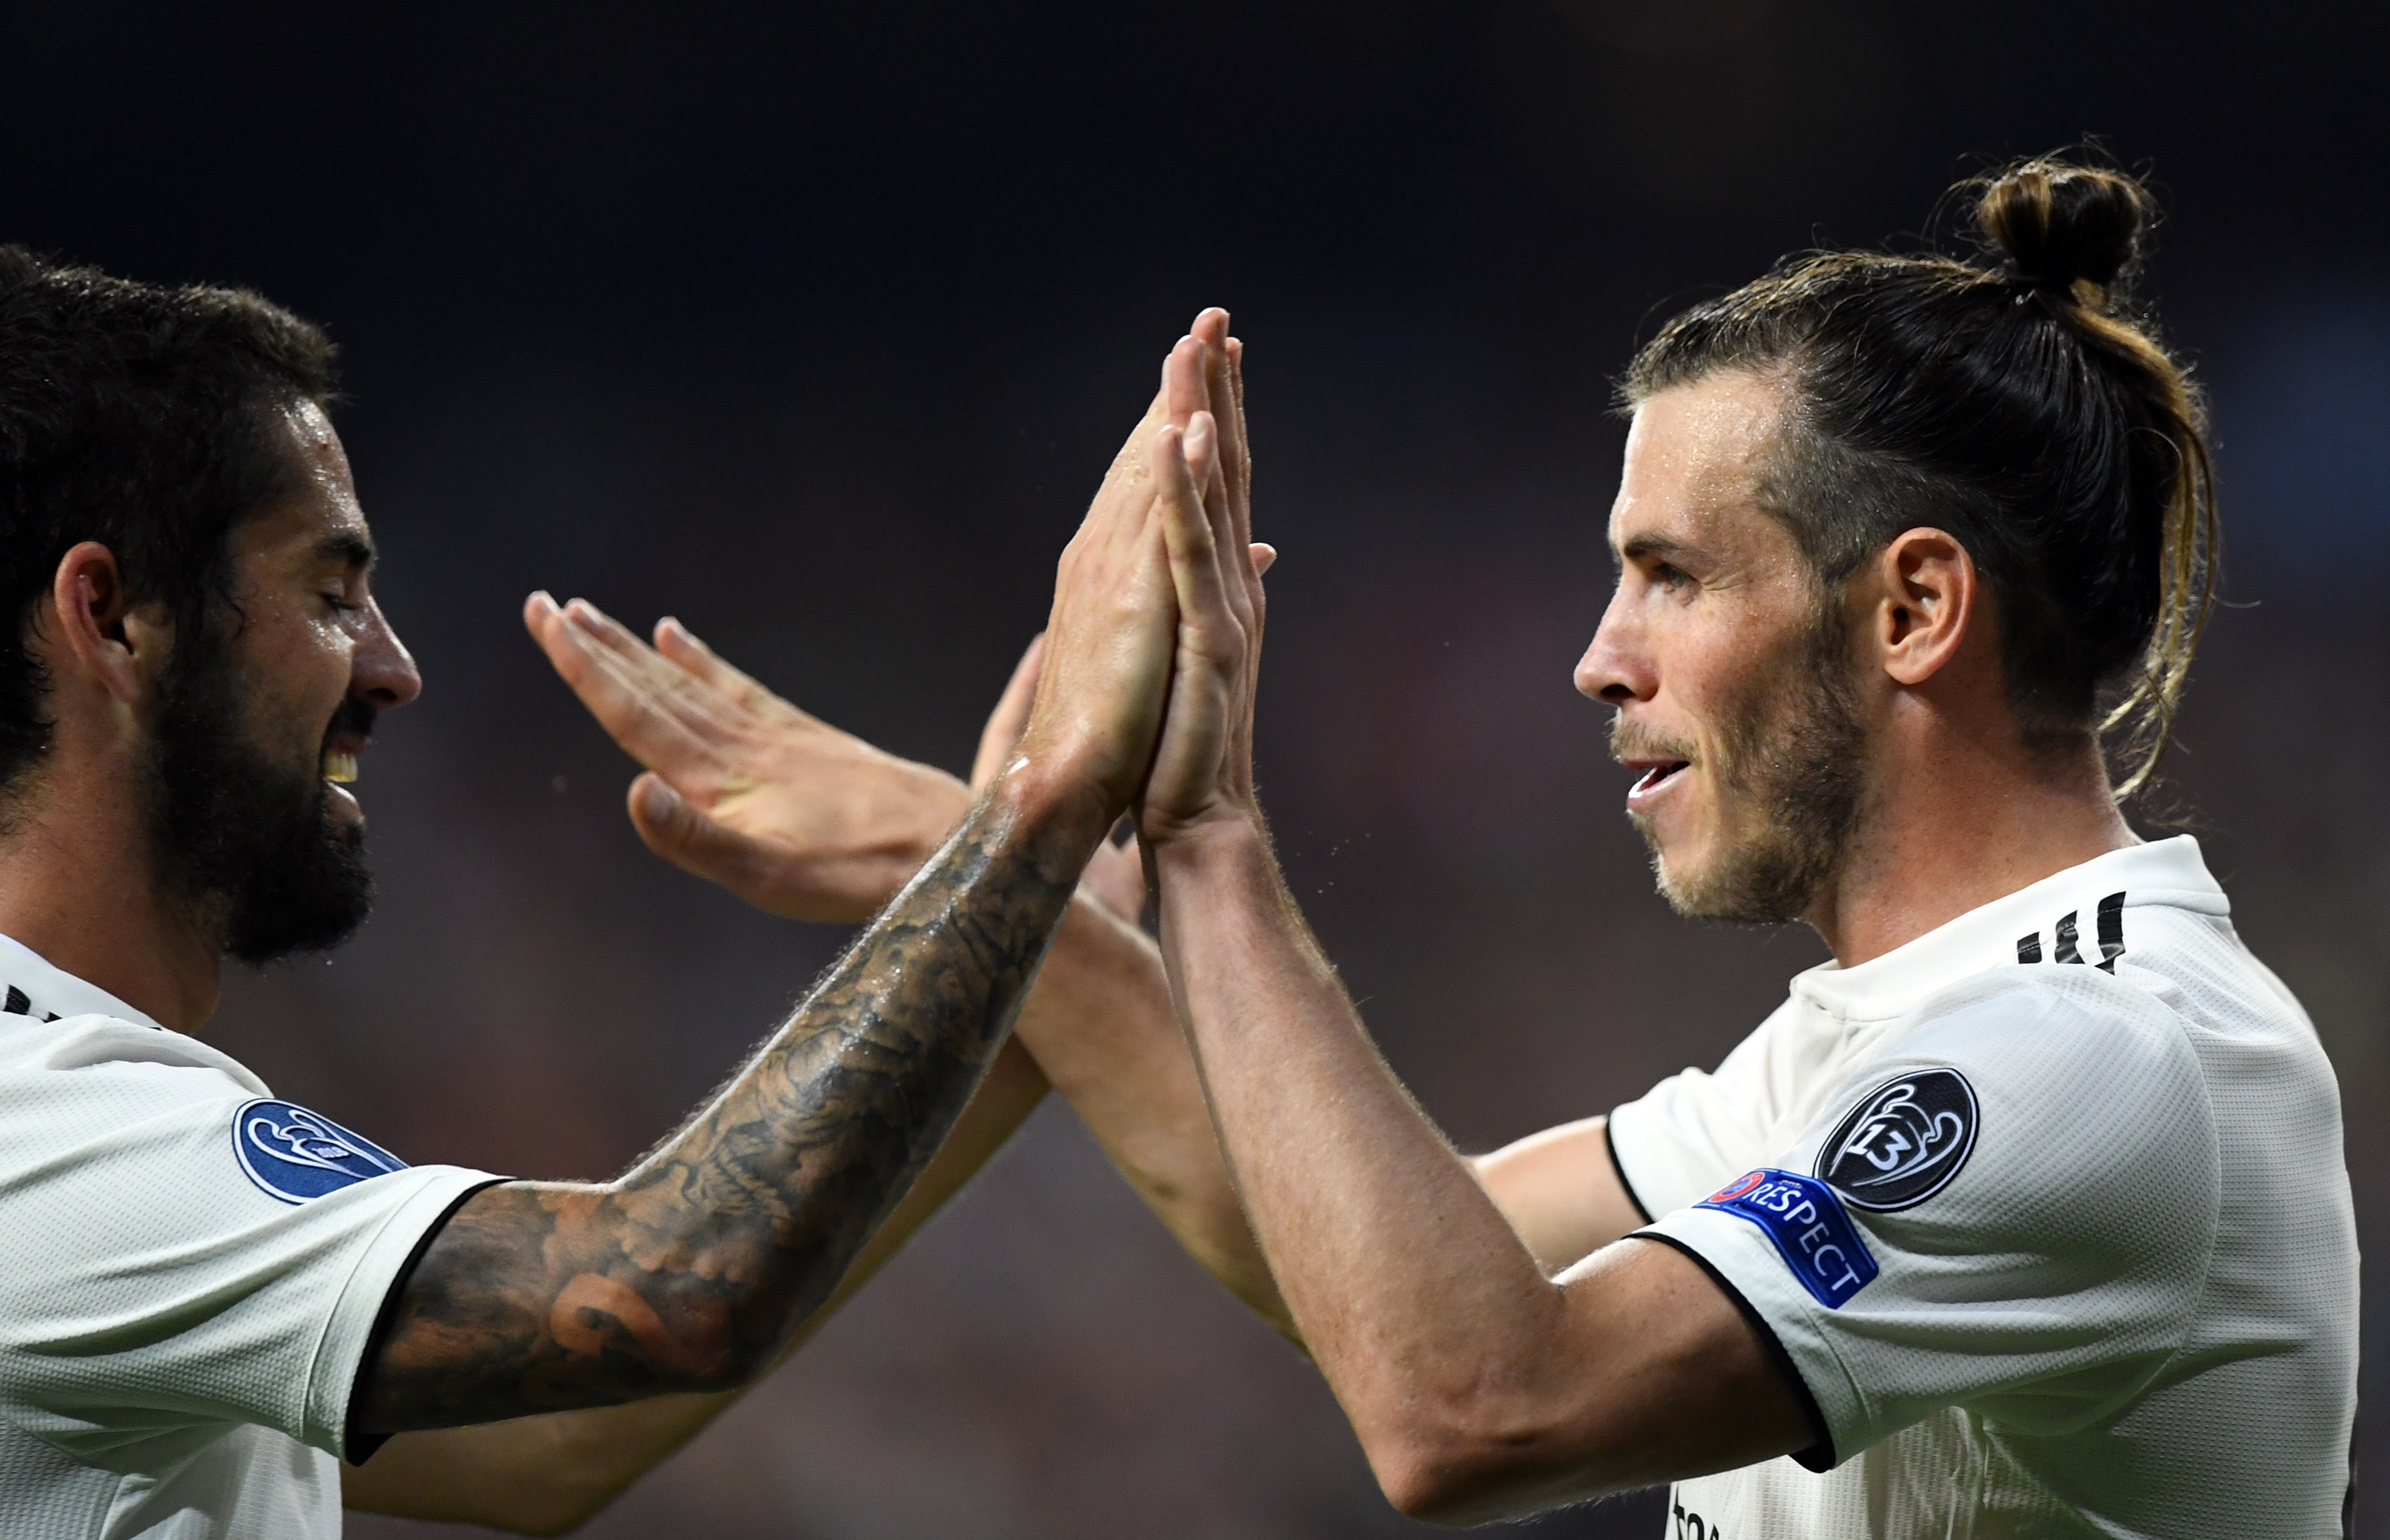 Real Madrid's Welsh forward Gareth Bale (R) celebrates scoring his team's second goal with Real Madrid's Spanish midfielder Isco during the UEFA Champions League group G football match between Real Madrid CF and AS Roma at the Santiago Bernabeu stadium in Madrid on September 19, 2018. (Photo by GABRIEL BOUYS / AFP)        (Photo credit should read GABRIEL BOUYS/AFP/Getty Images)